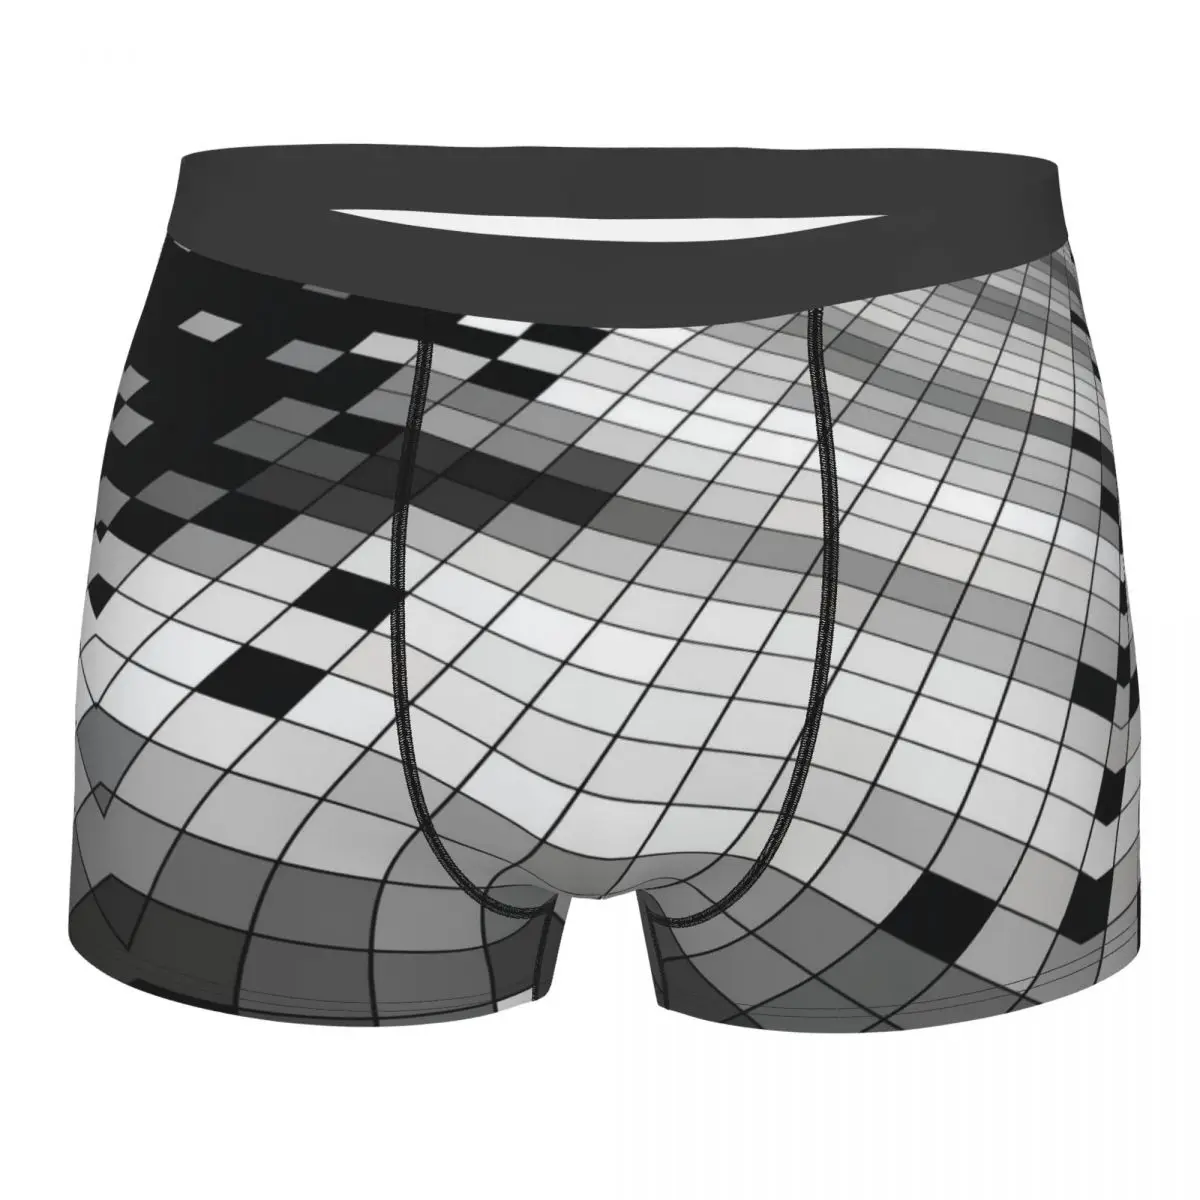 Black And White 3D Grid Men Boxer Briefs Underwear Highly Breathable Top Quality Gift Idea small talk stickers vintage sticker book idea 4 3 x7 6inch sheet size 406 stickers black white